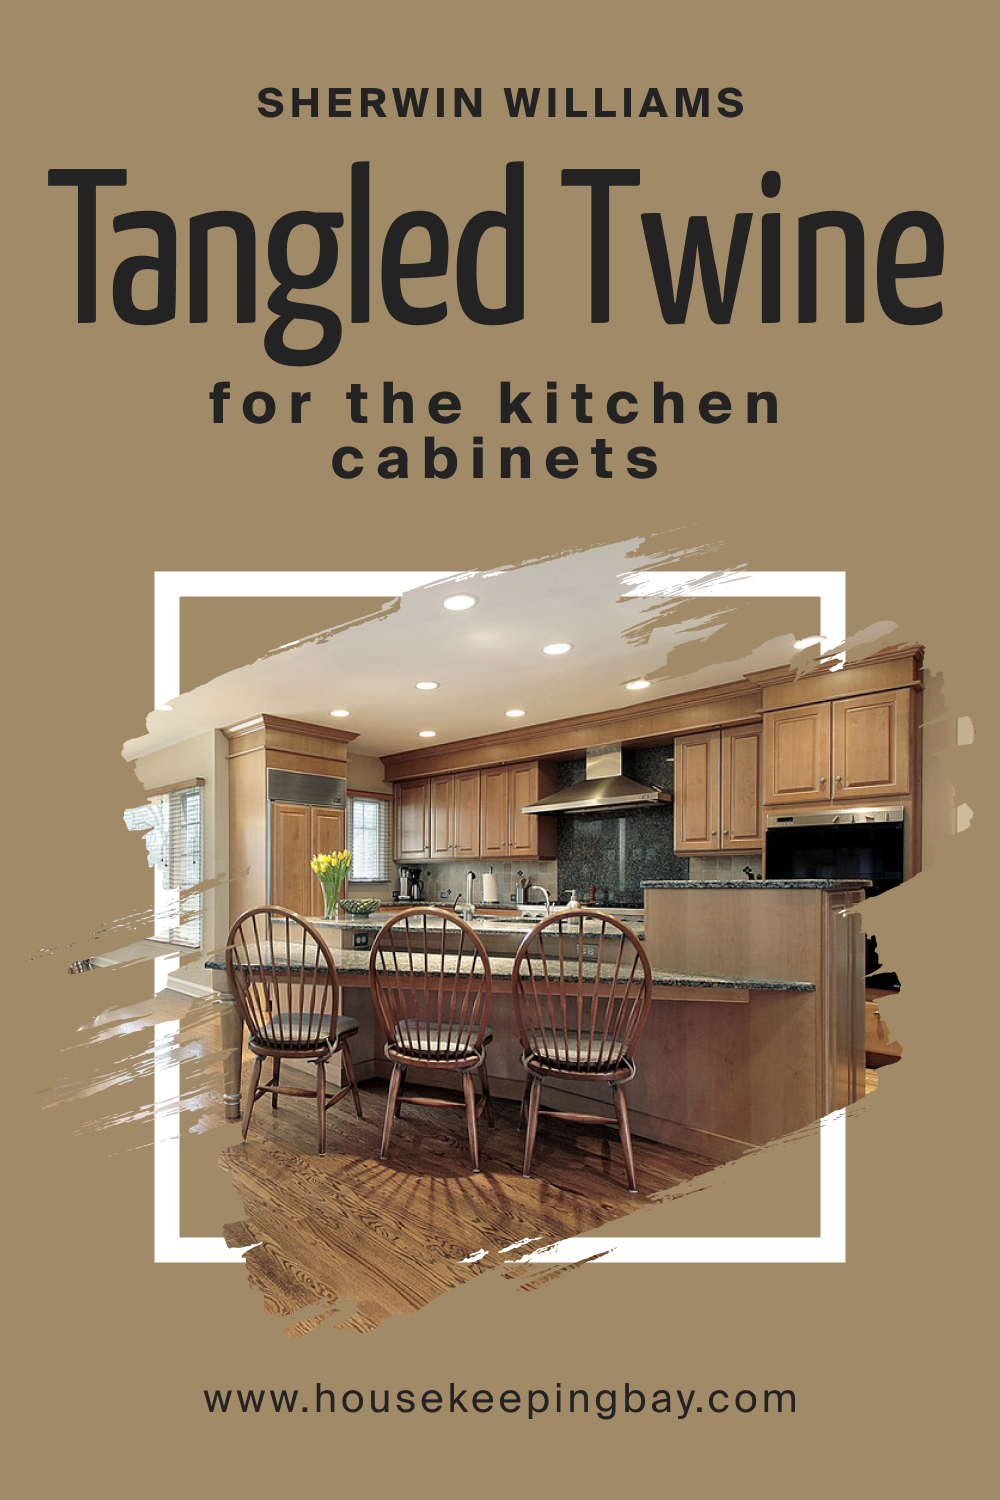 Sherwin Williams. SW 9538 Tangled Twine For the Kitchen Cabinets